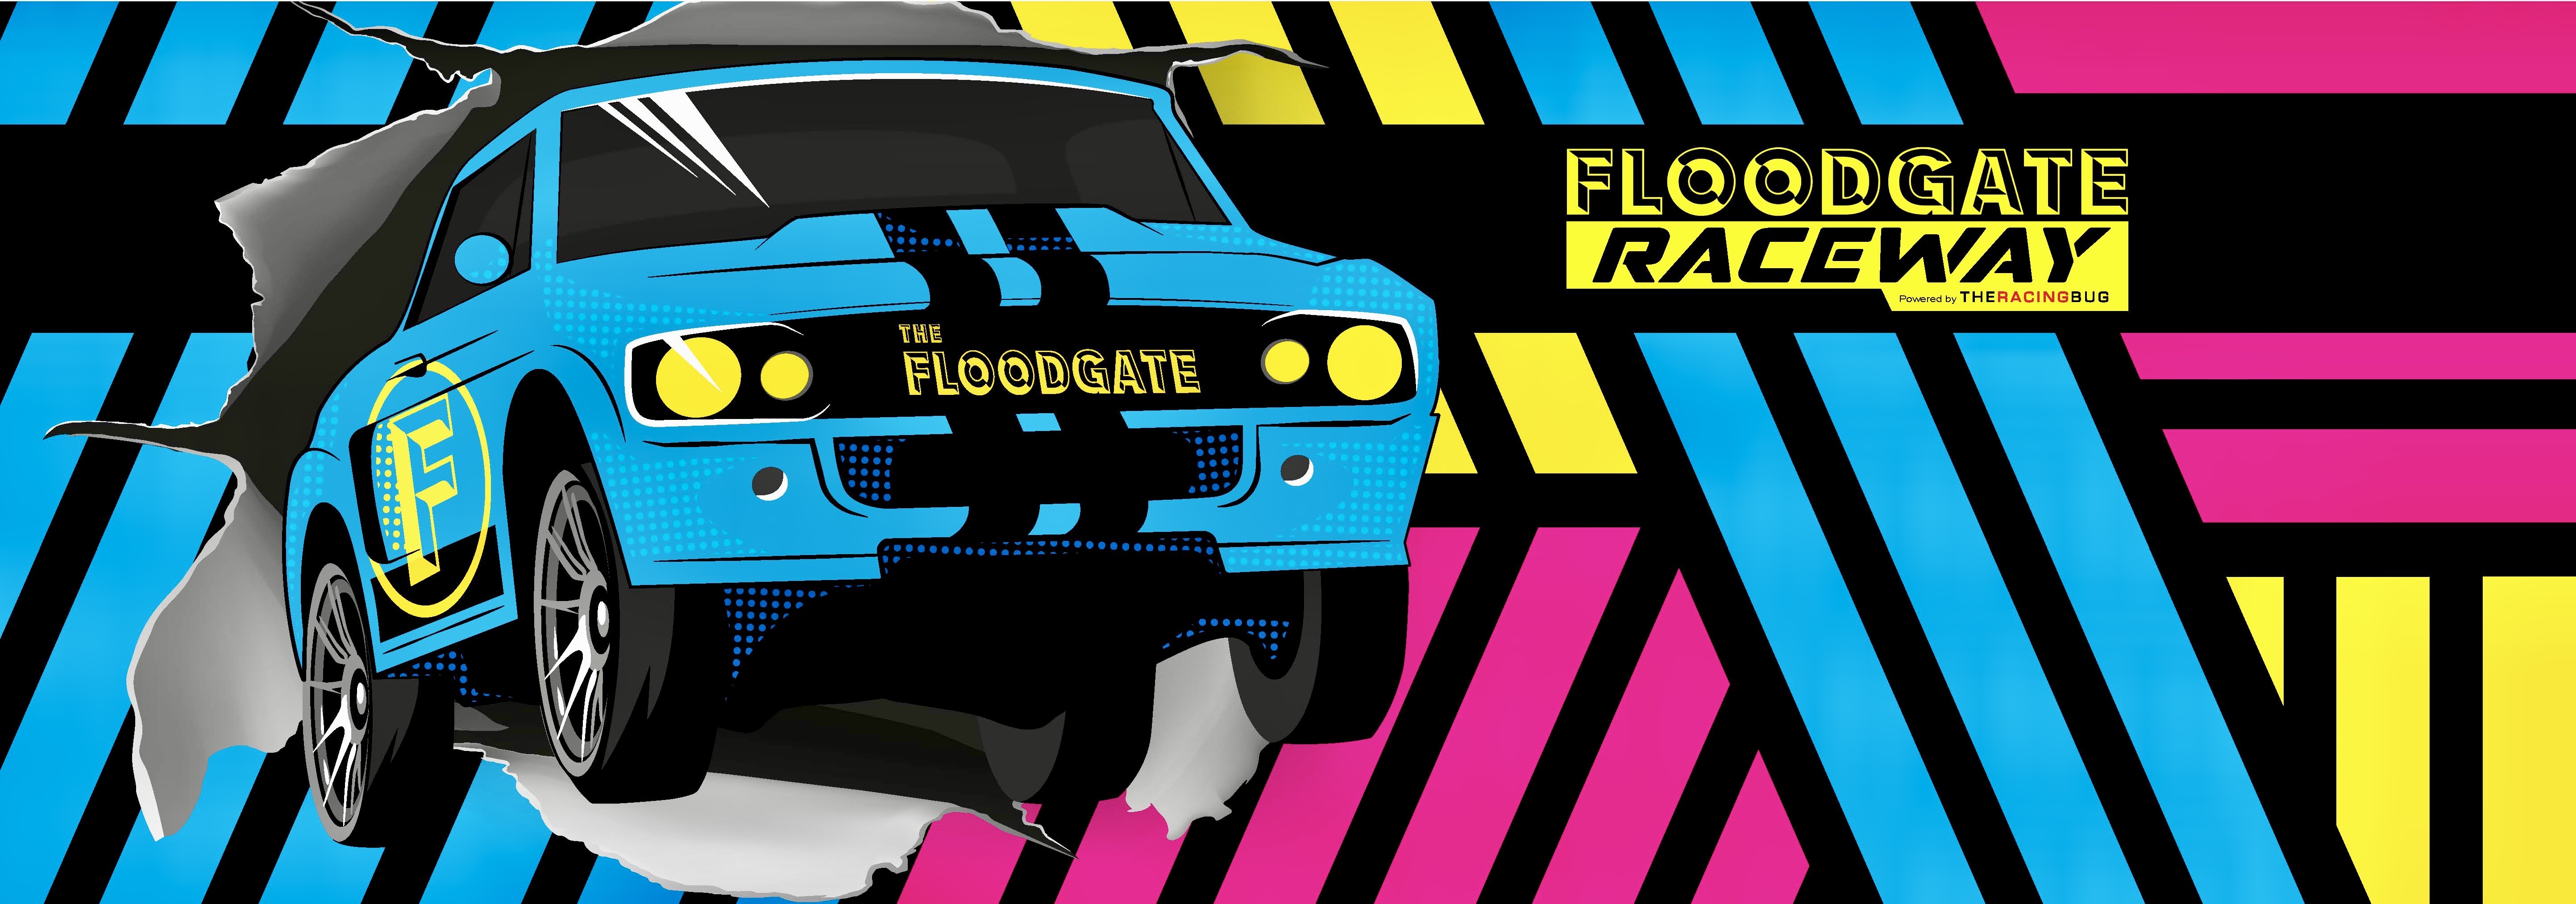 Introducing The Floodgate Raceway